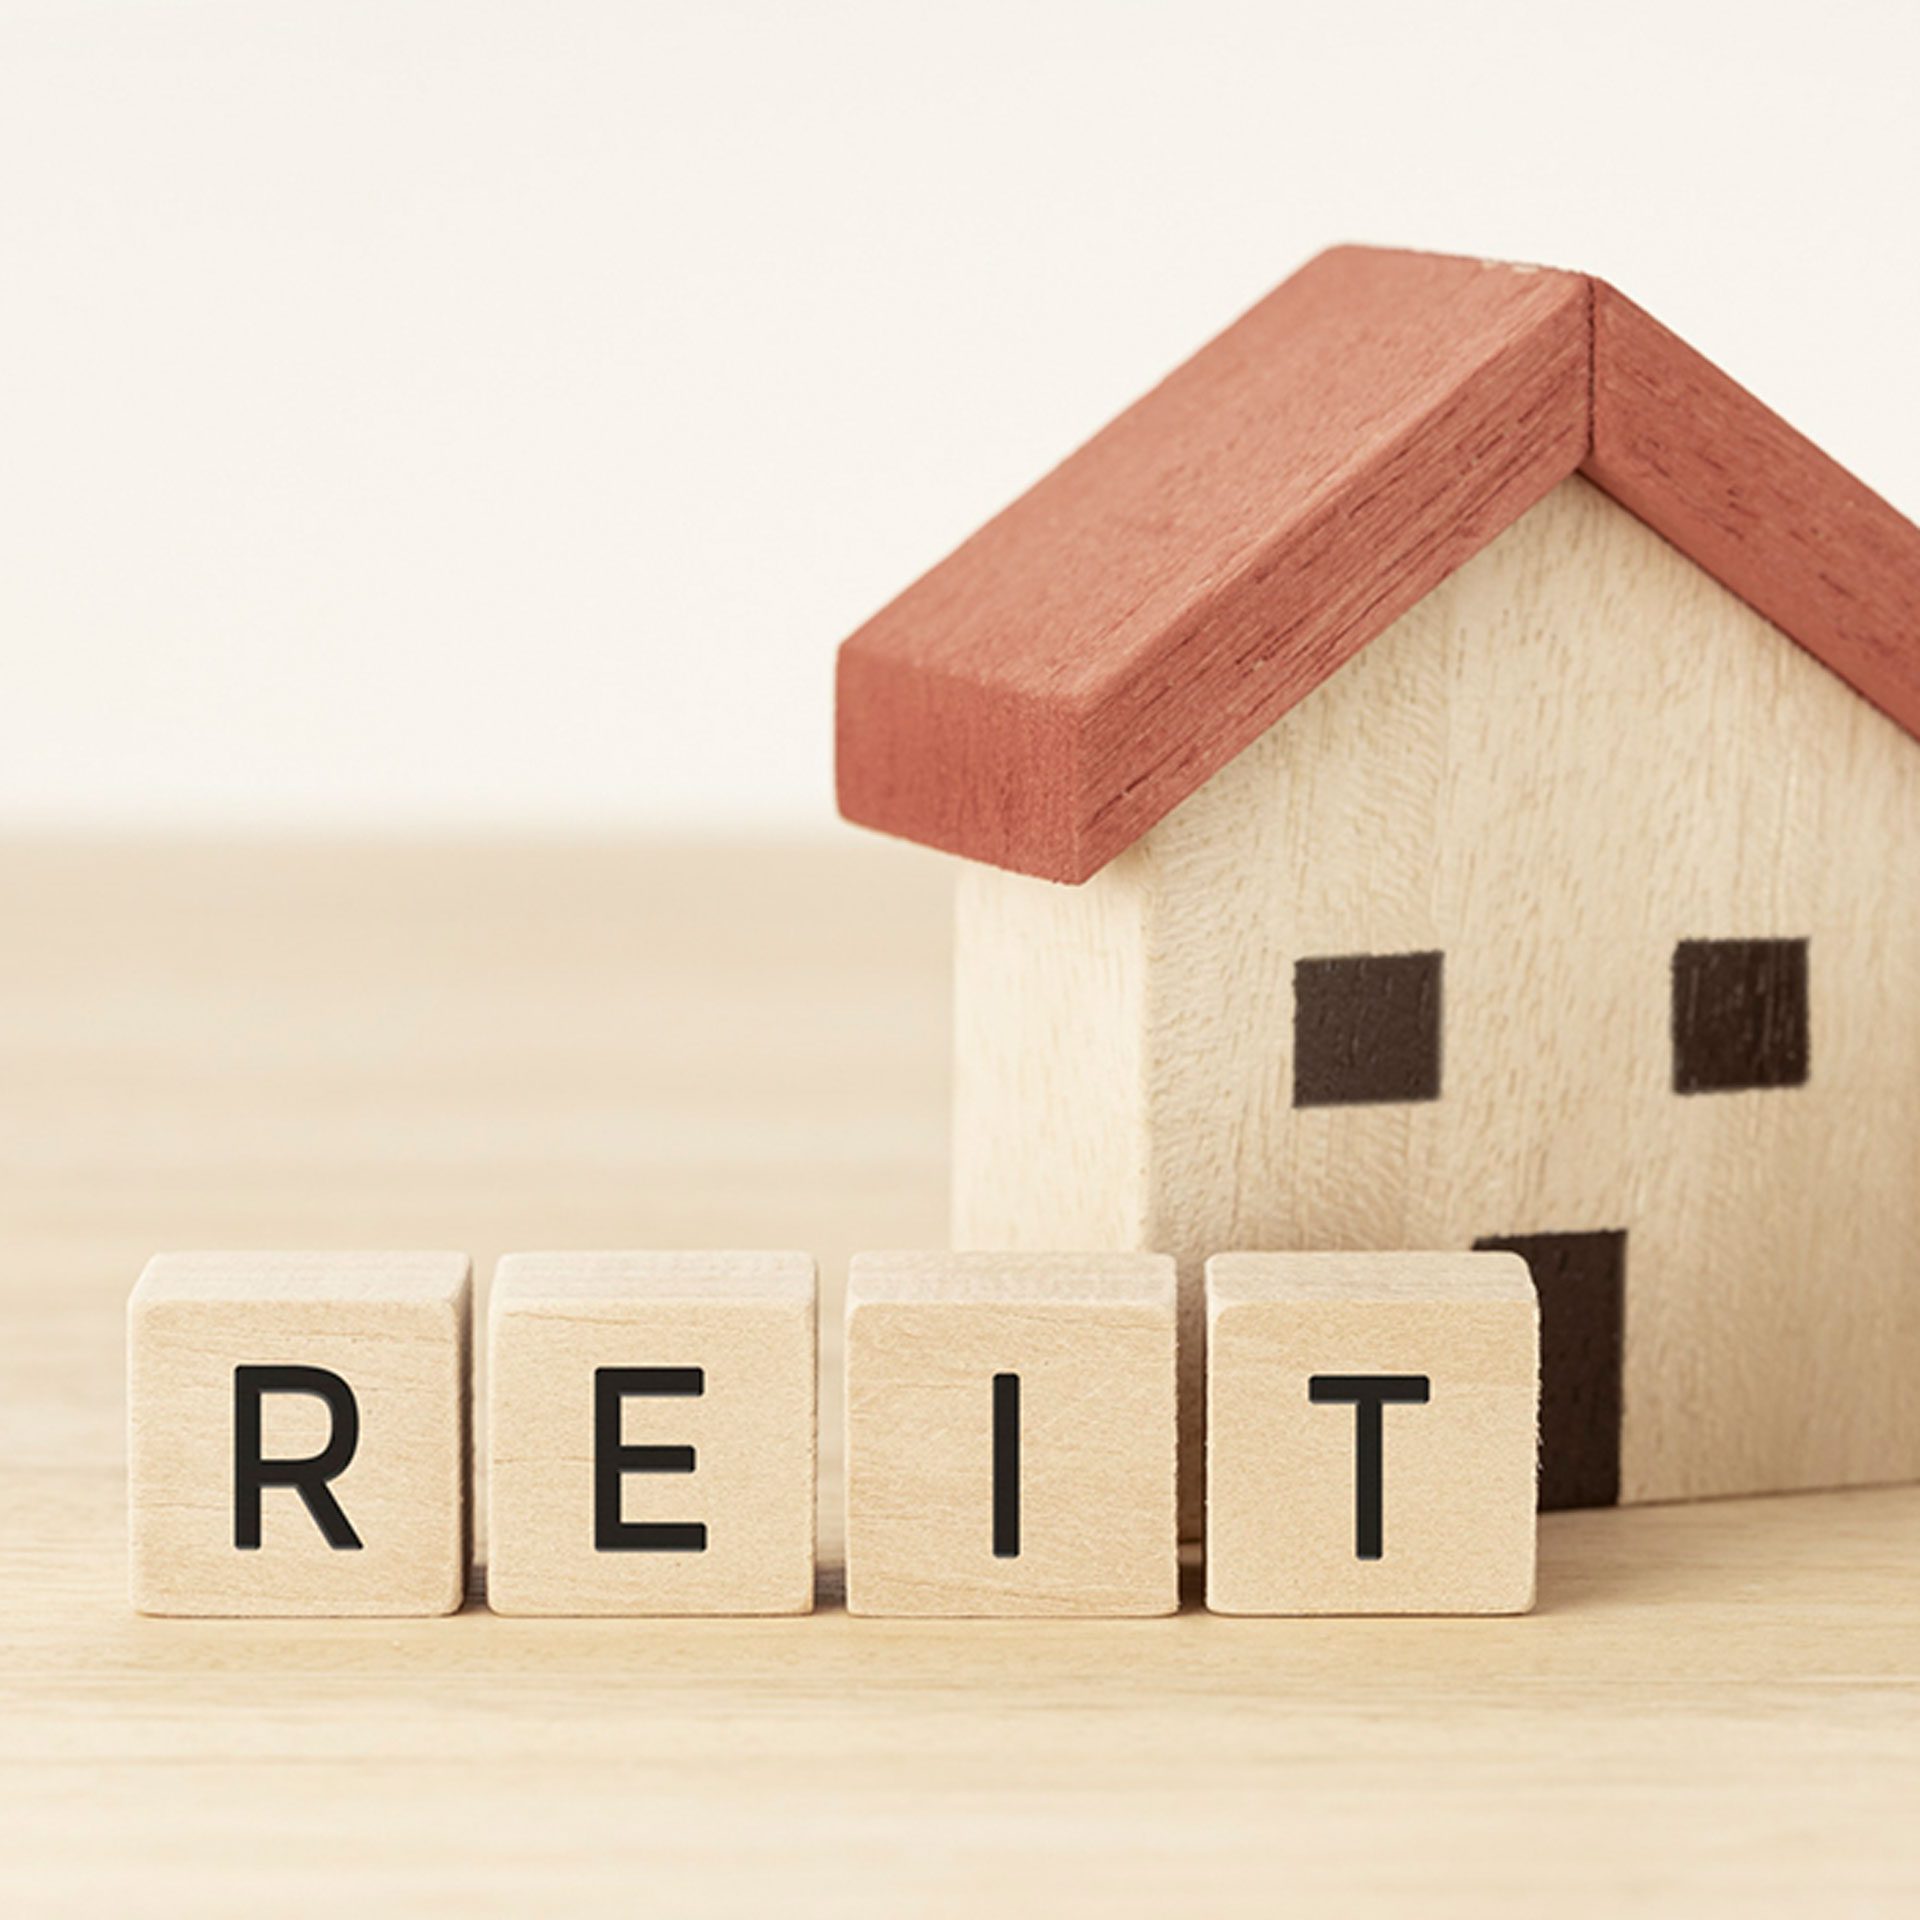 Text 'Reit' on wood blocks, next to a house model